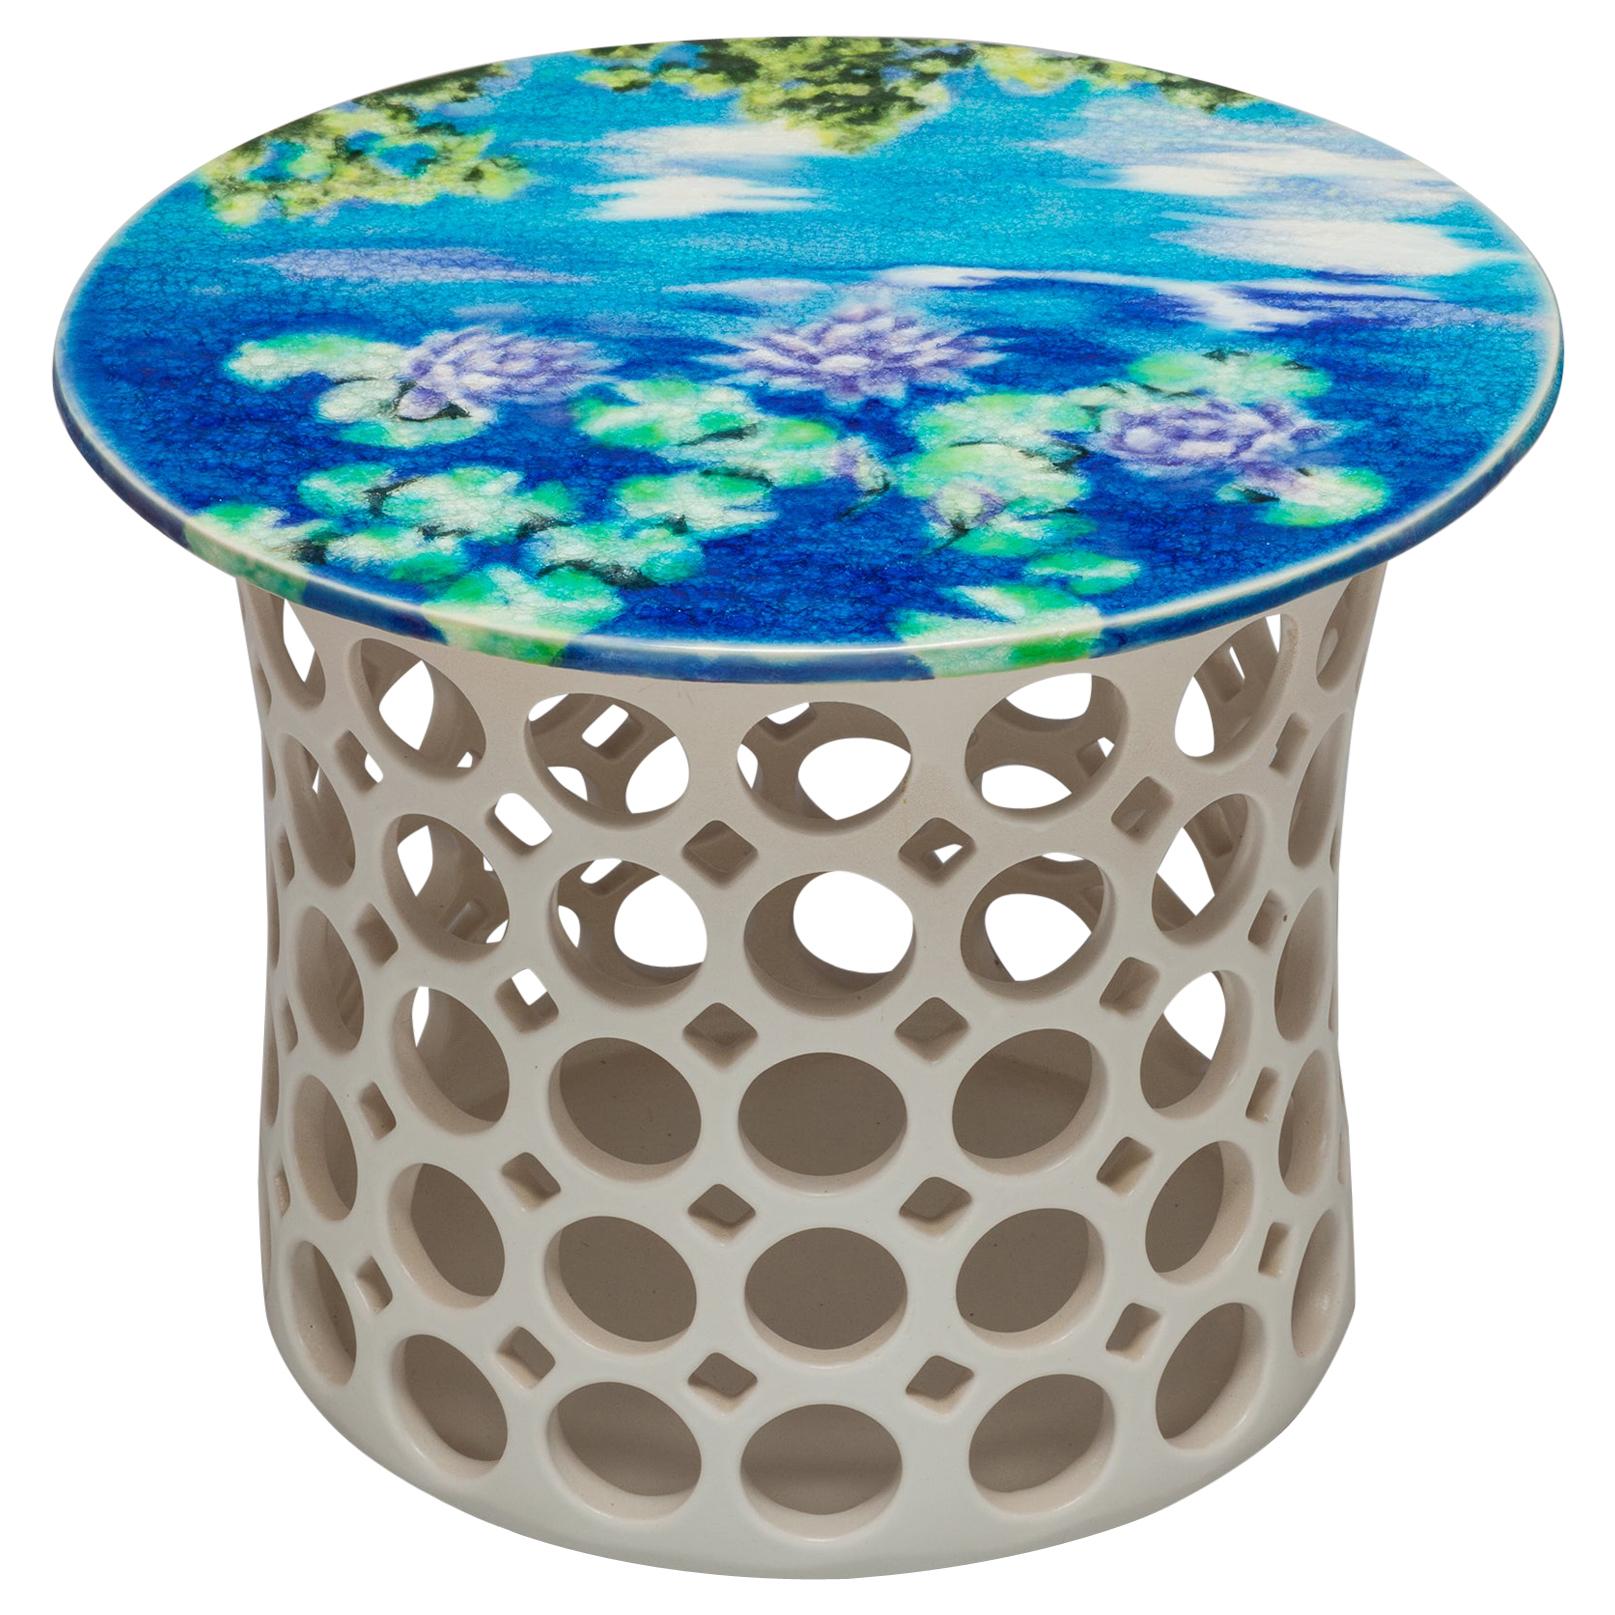 White Ceramic Pierced Side Table with Blue/Turquoise Impressionist Ceramic Top